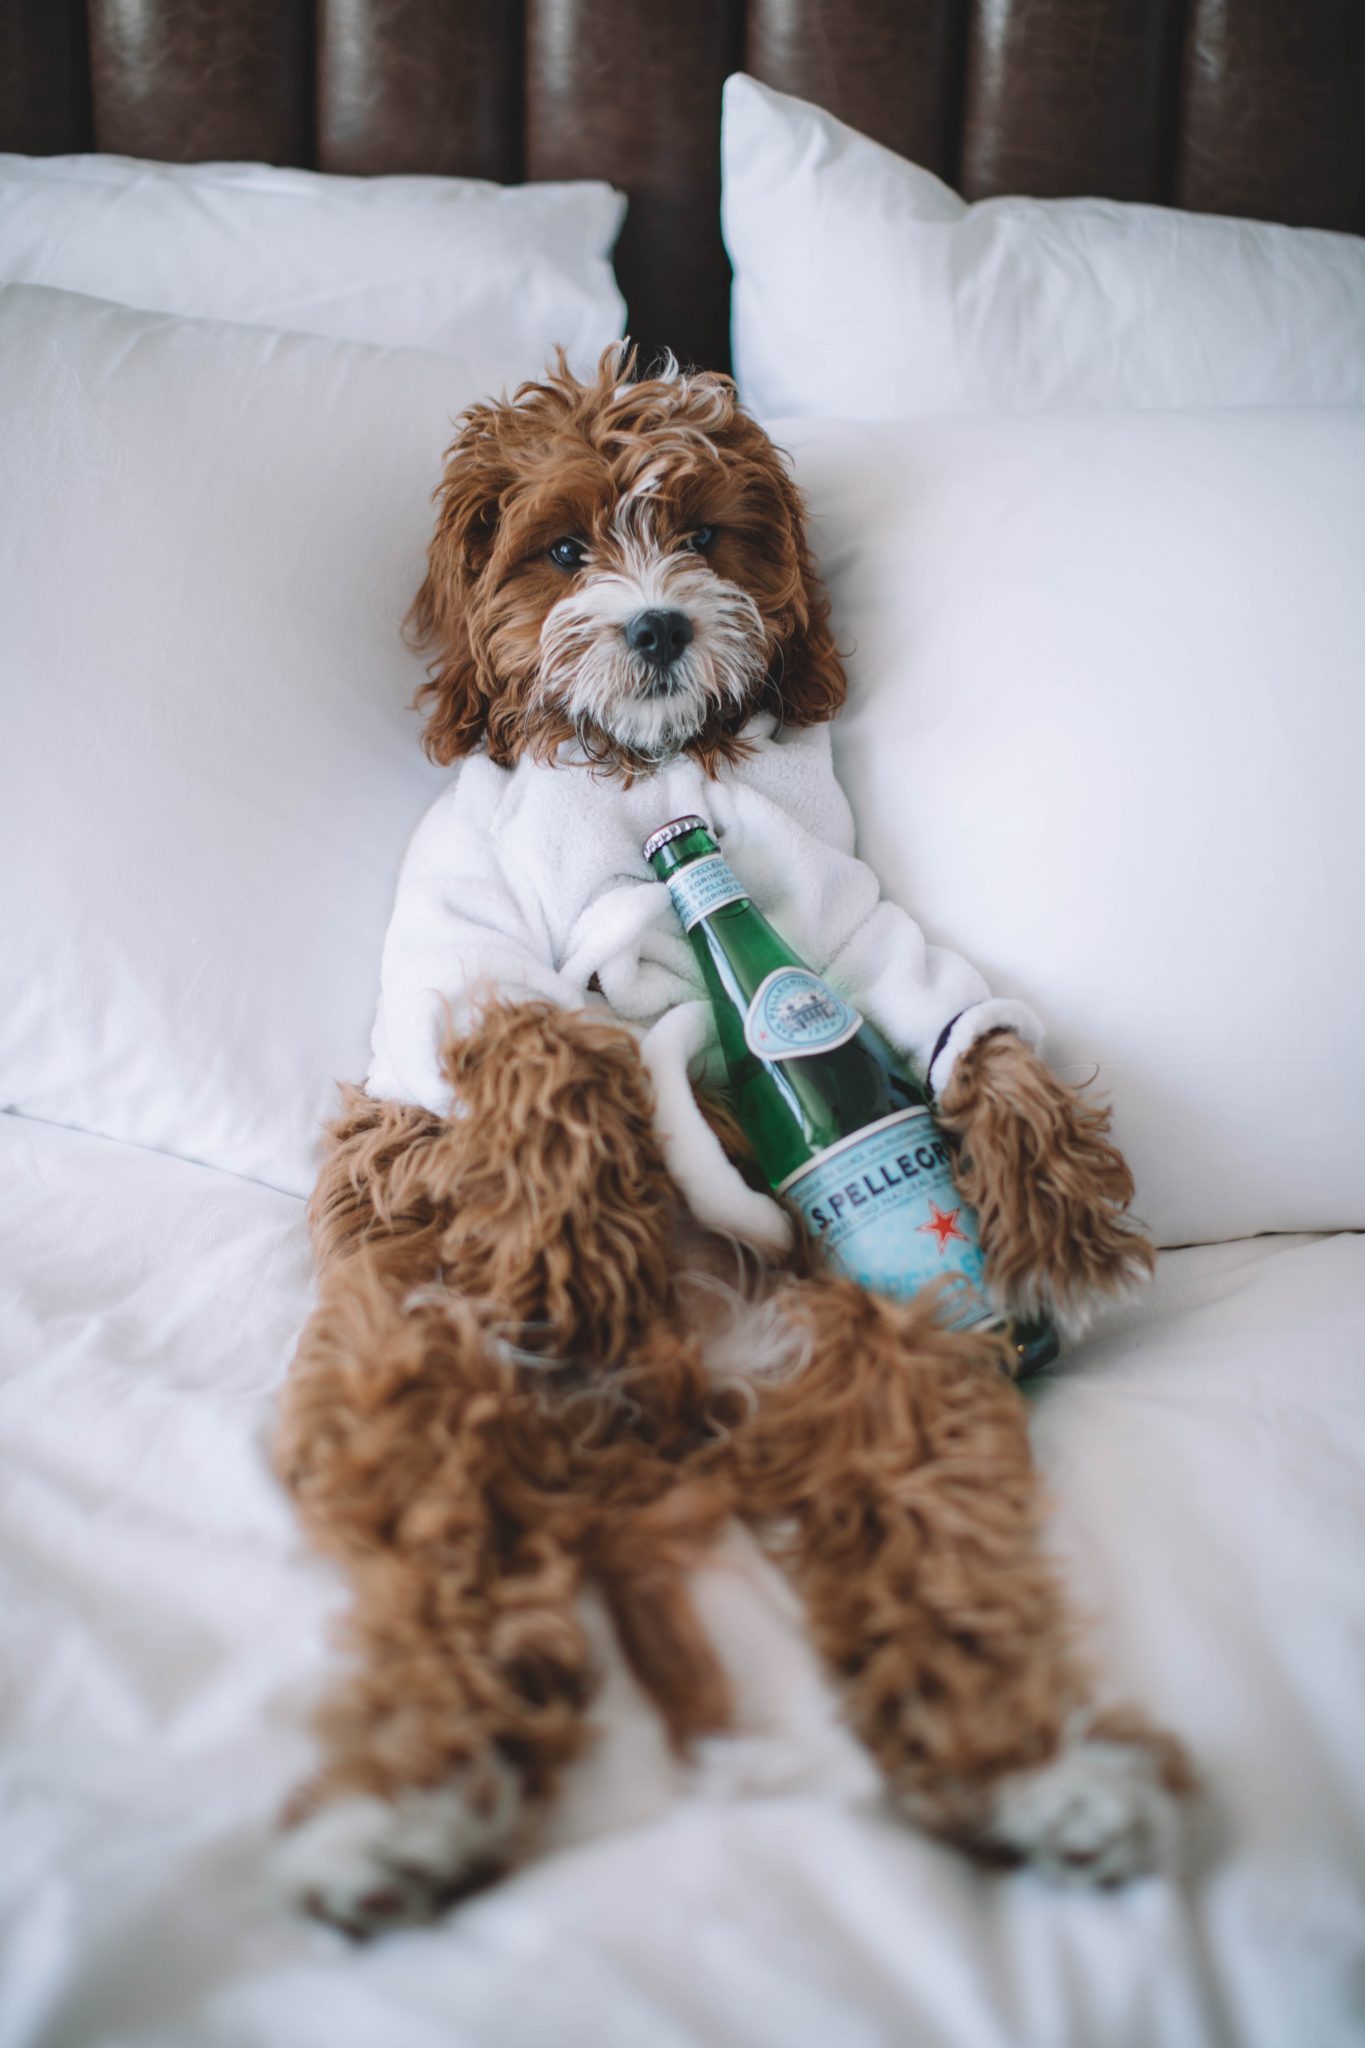 curly dog laying on bed in pet friendly hotel wearing white robe and holding bottle of pellegrino 